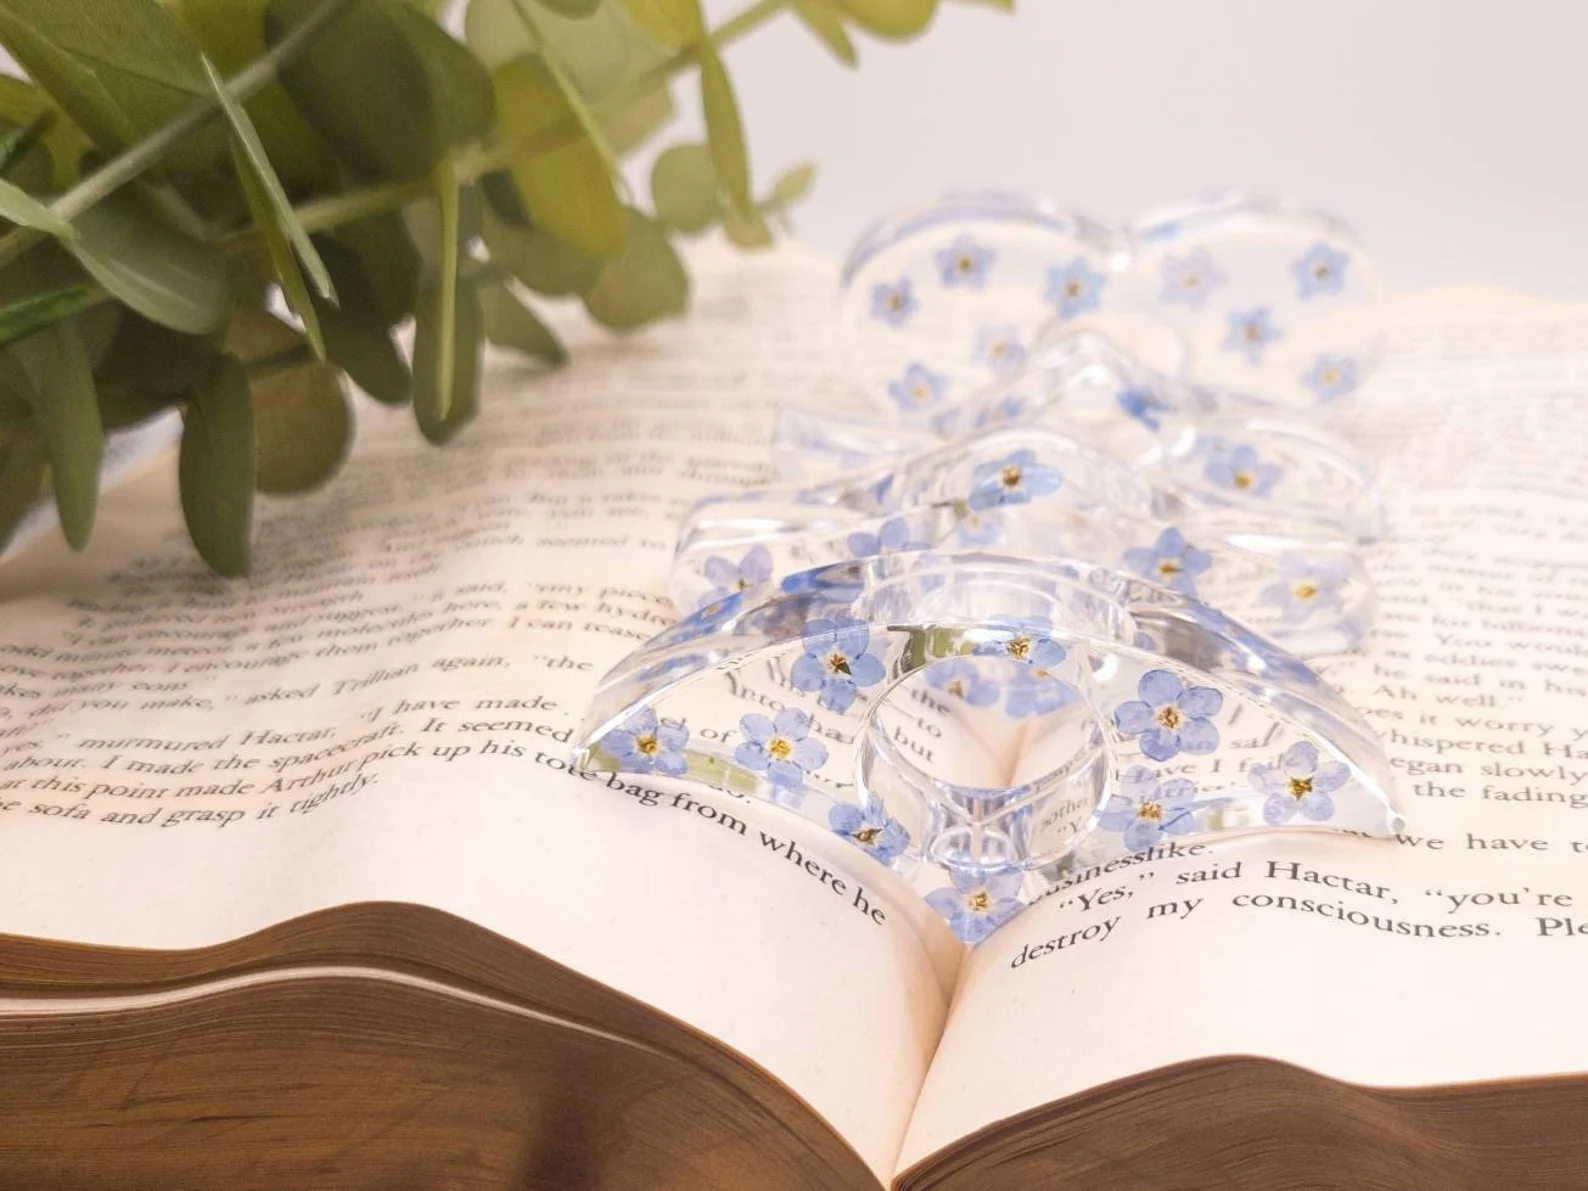 A clear acrylic book page holder with painted blue flowers